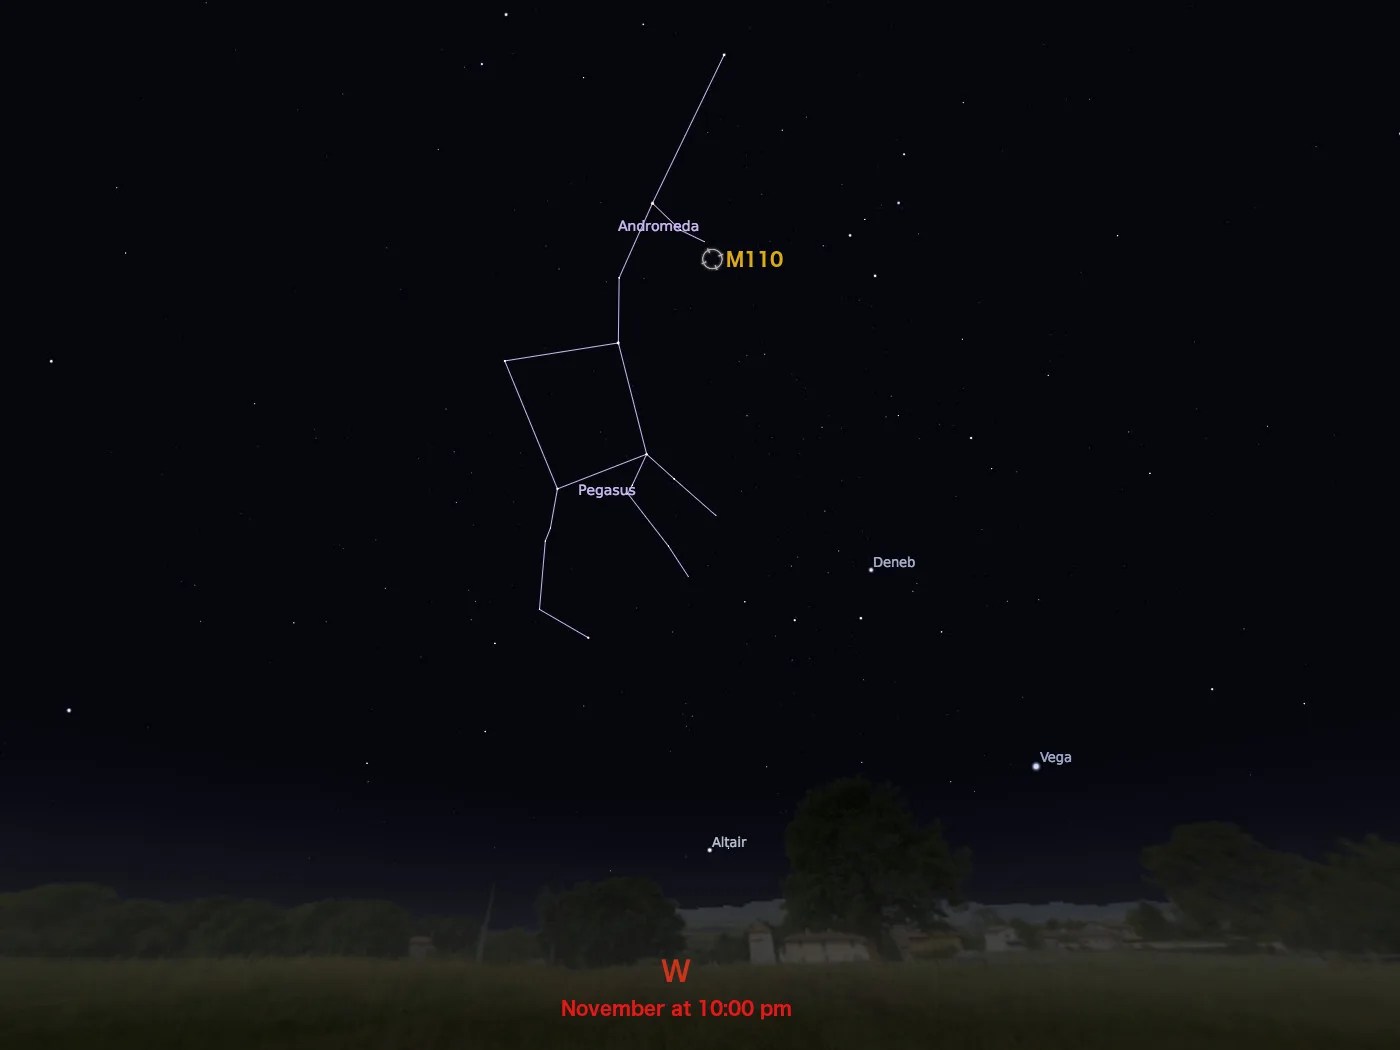 star chart showing location in night sky of M110